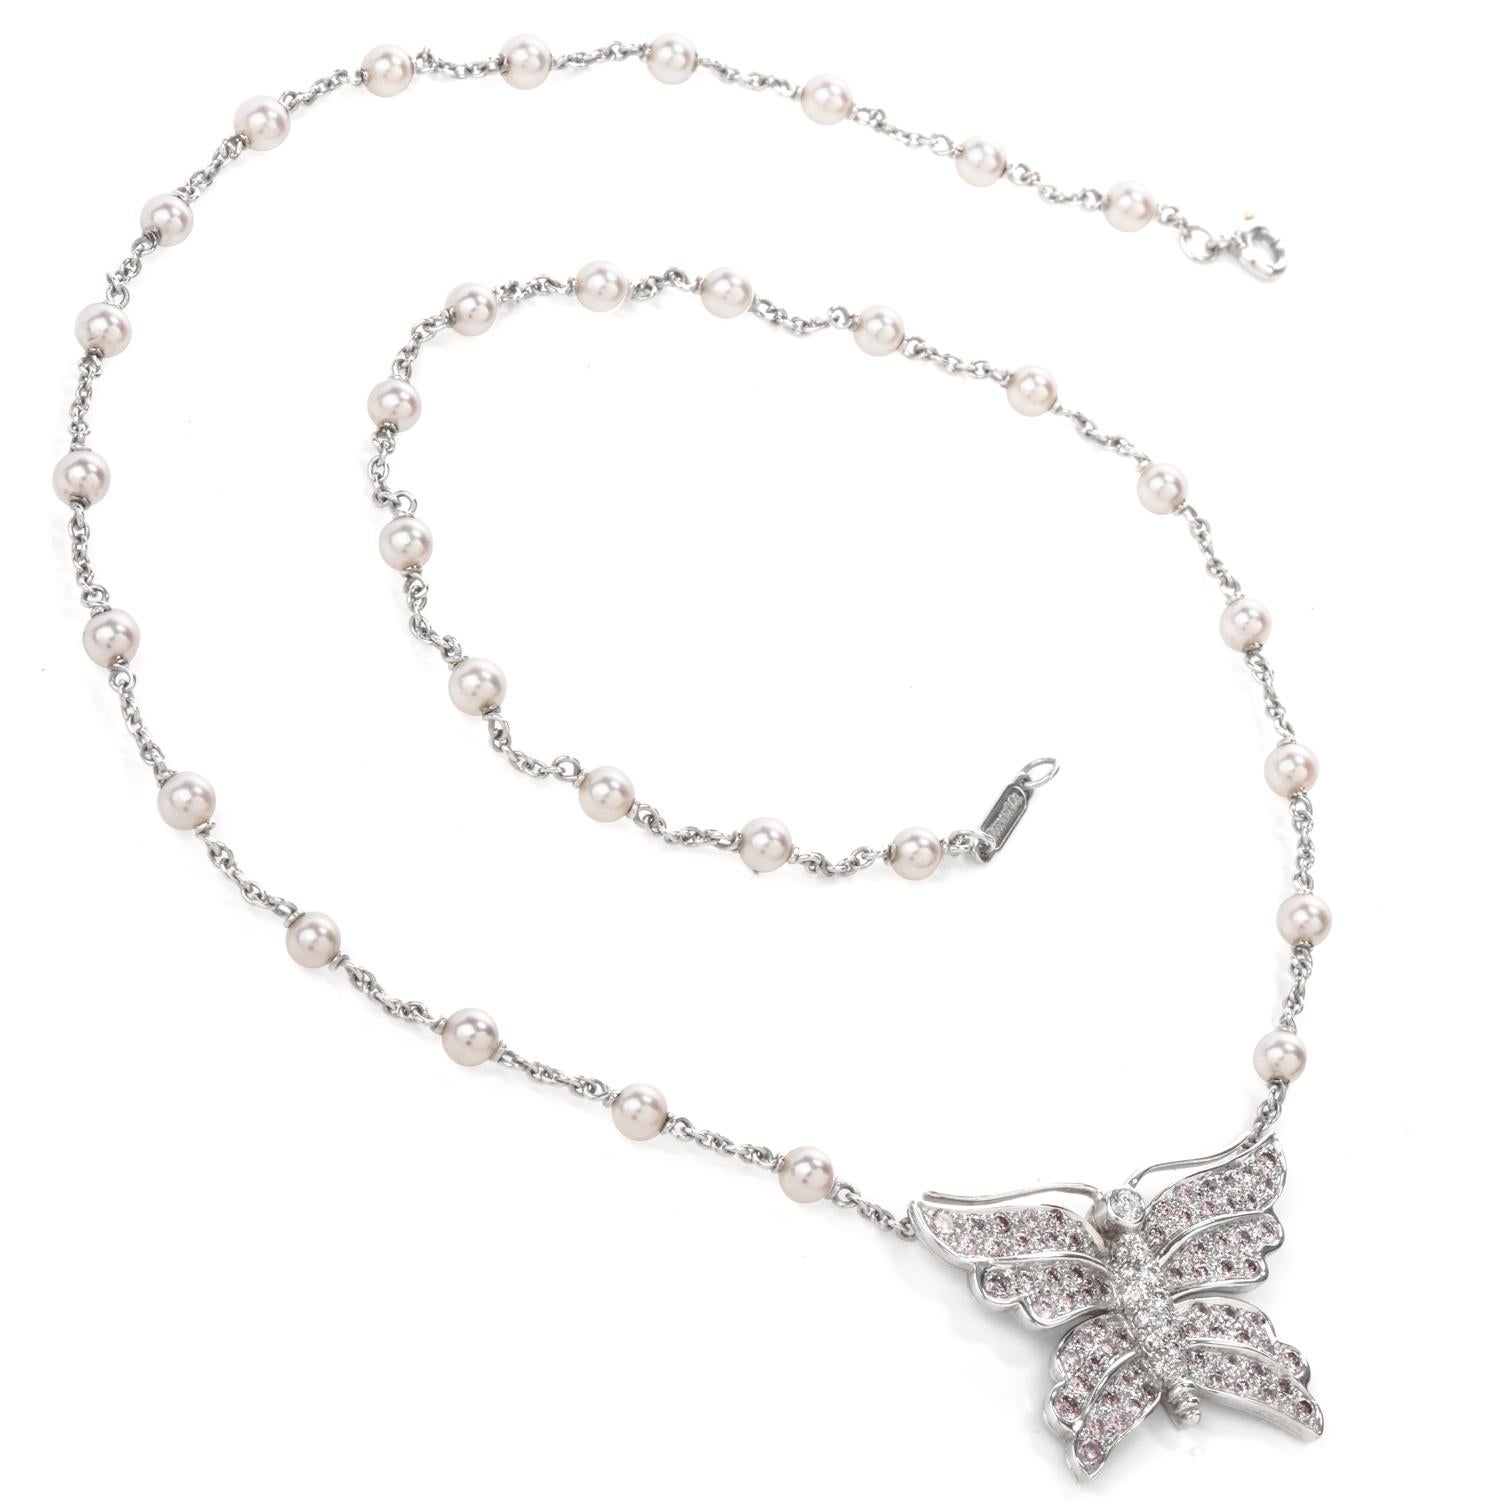 The Excellent Condition Tiffany and Co. Diamond and Akoya Salt Water Pearl necklace was inspired in a Butterfly motif and crafted in Platinum. Adorning throughout the body are Natural Fancy Pink and White Diamonds at a  combined weight of